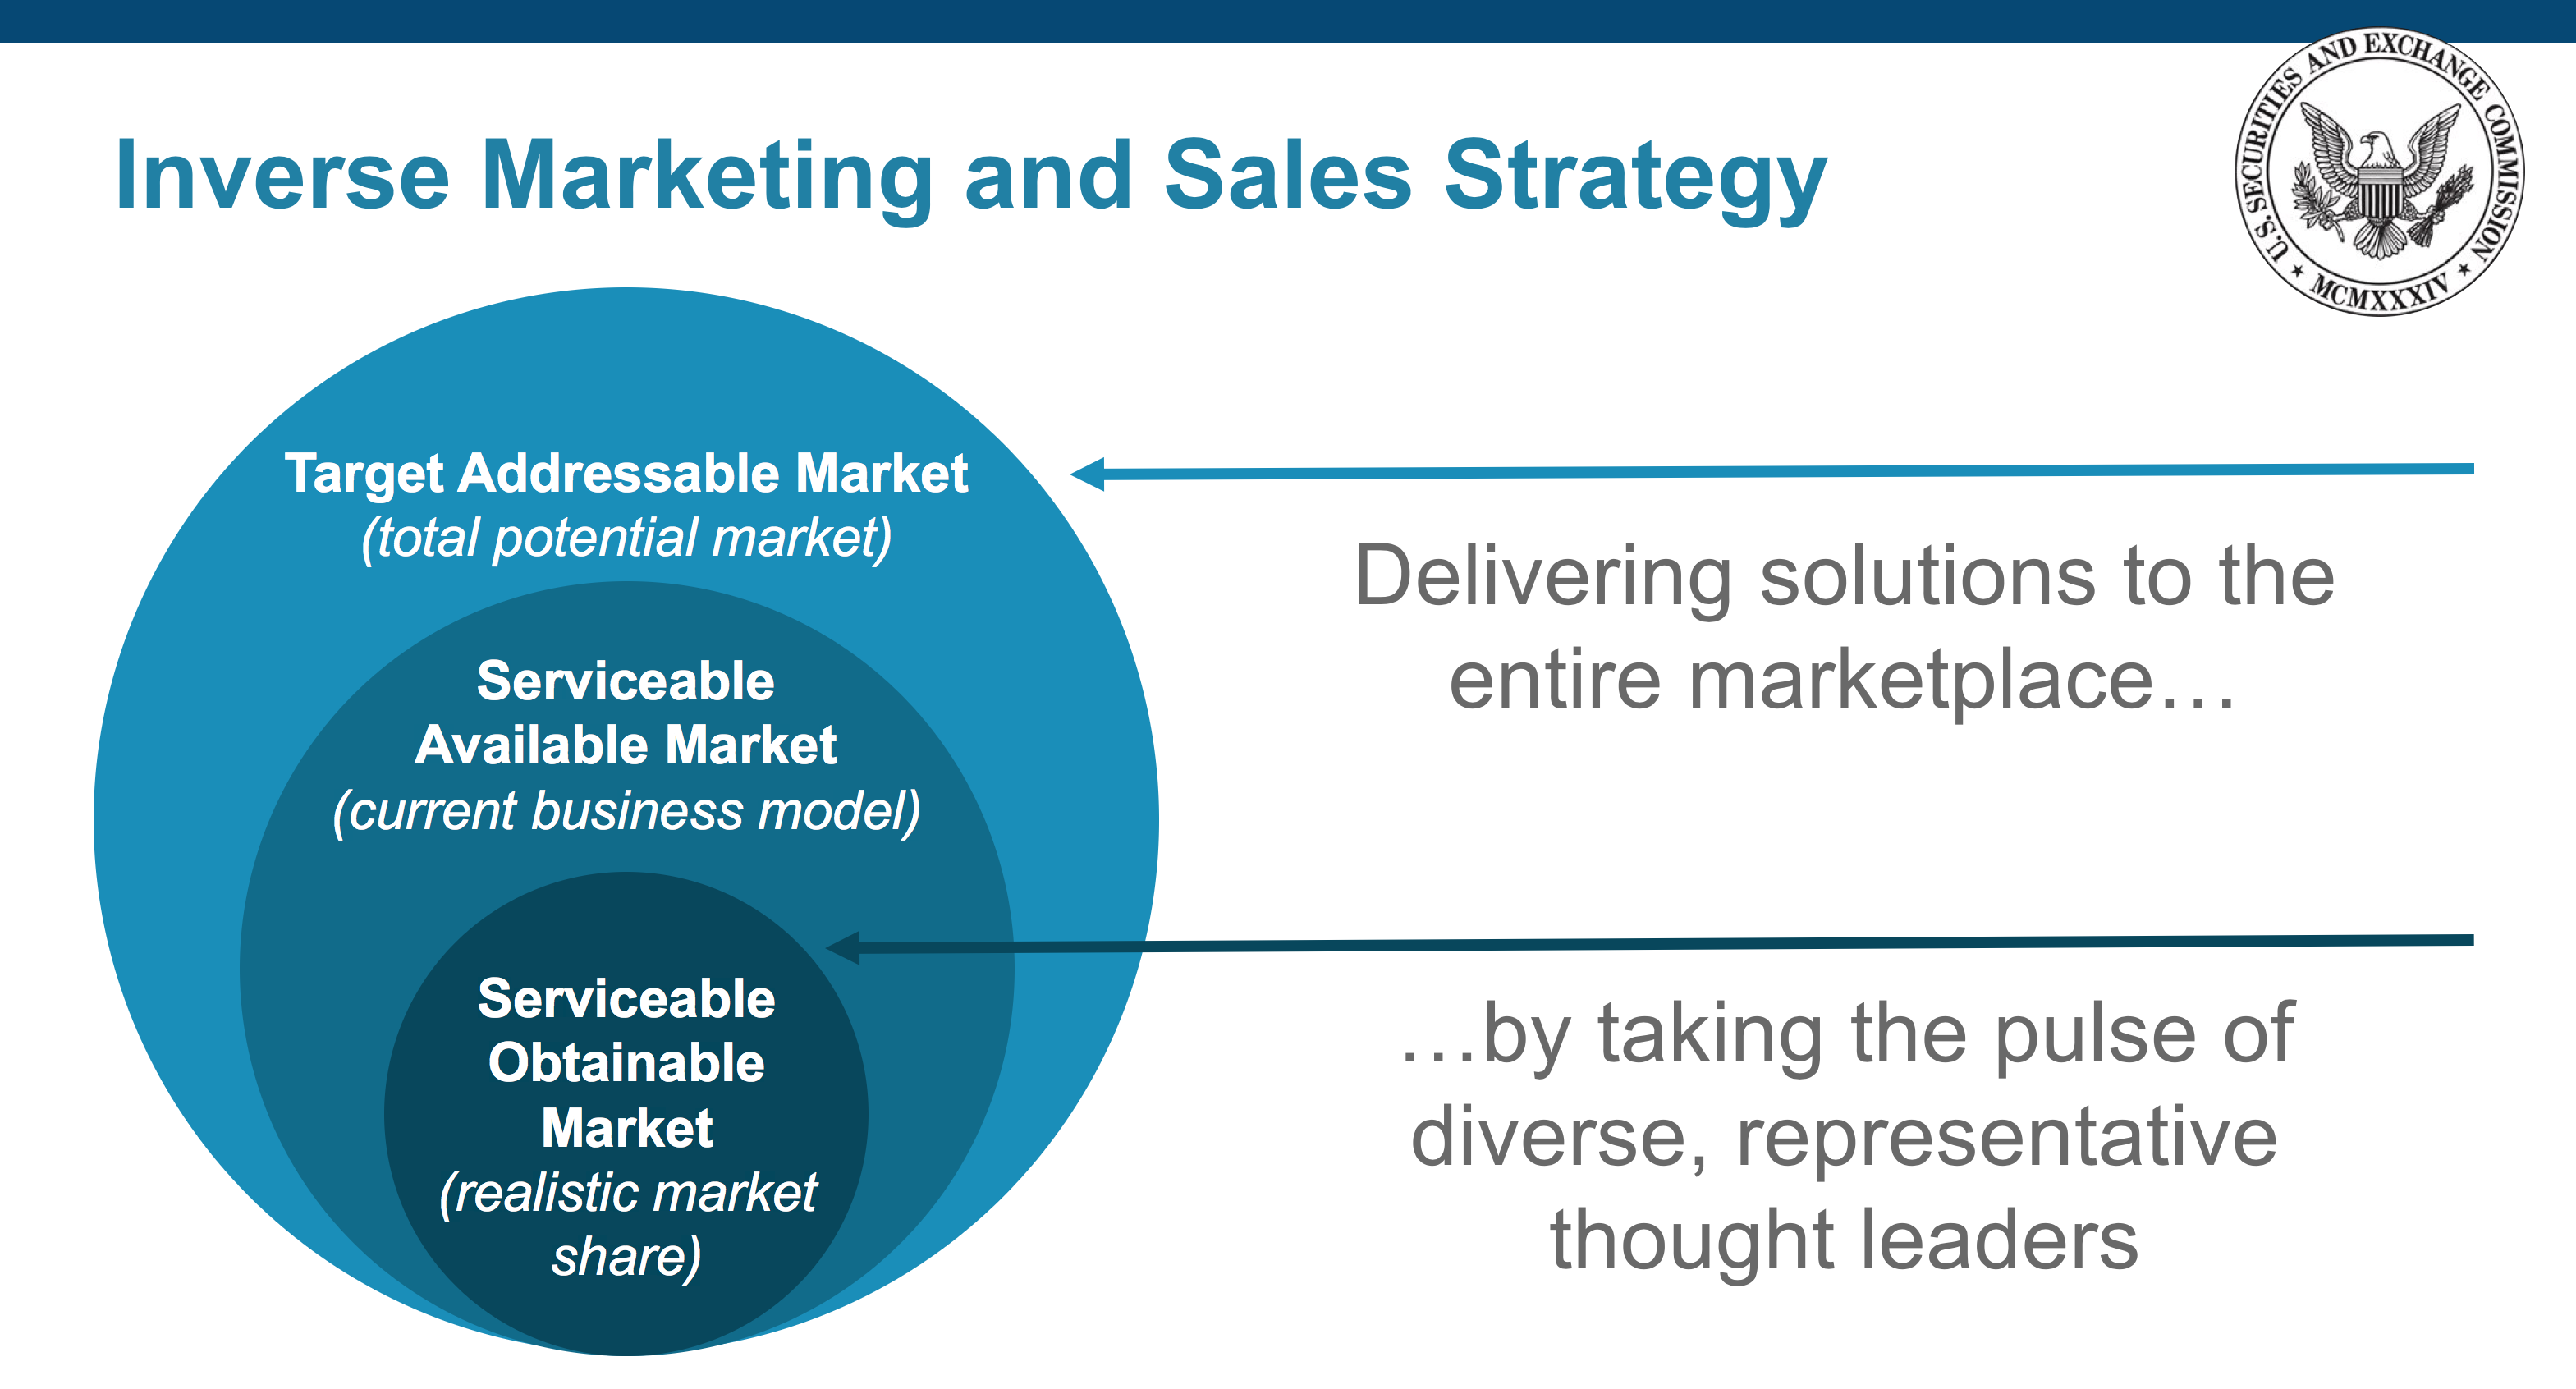 Inverse Marketing and Sales Strategy slide